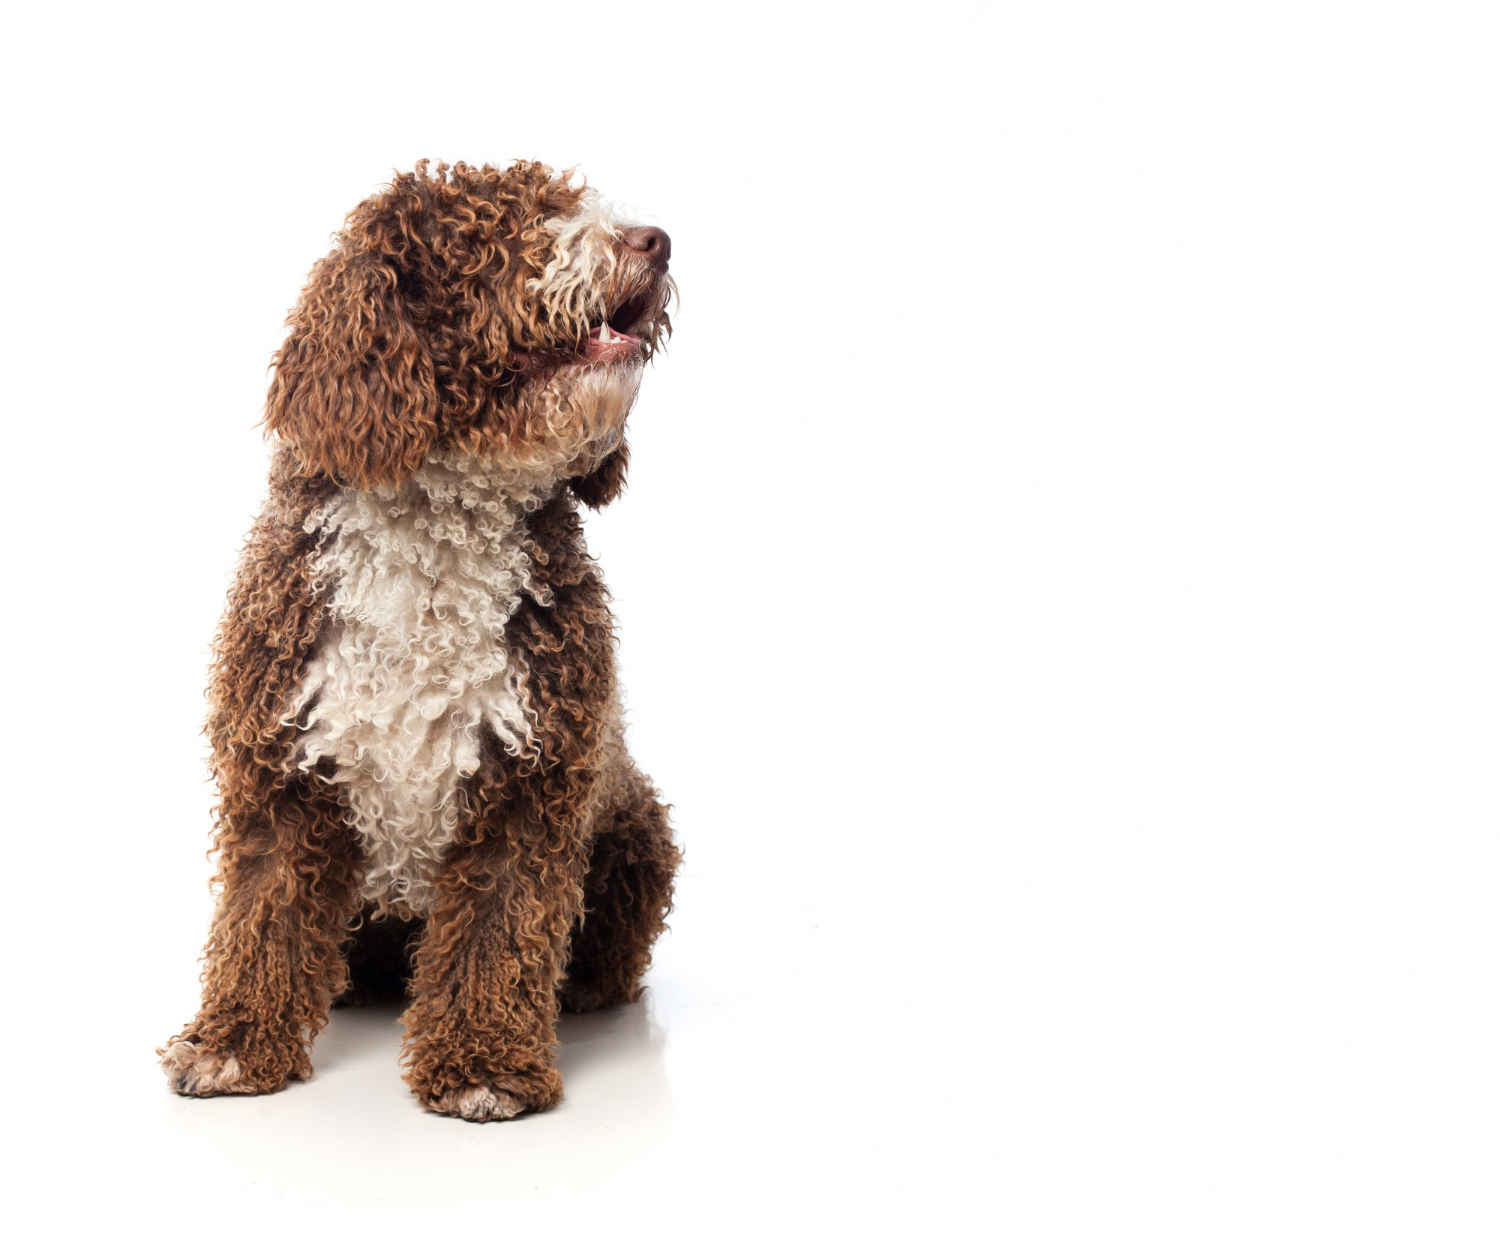 Say Goodbye to Excessive Licking: Effective Ways to Manage Your Goldendoodle's Licking Habits